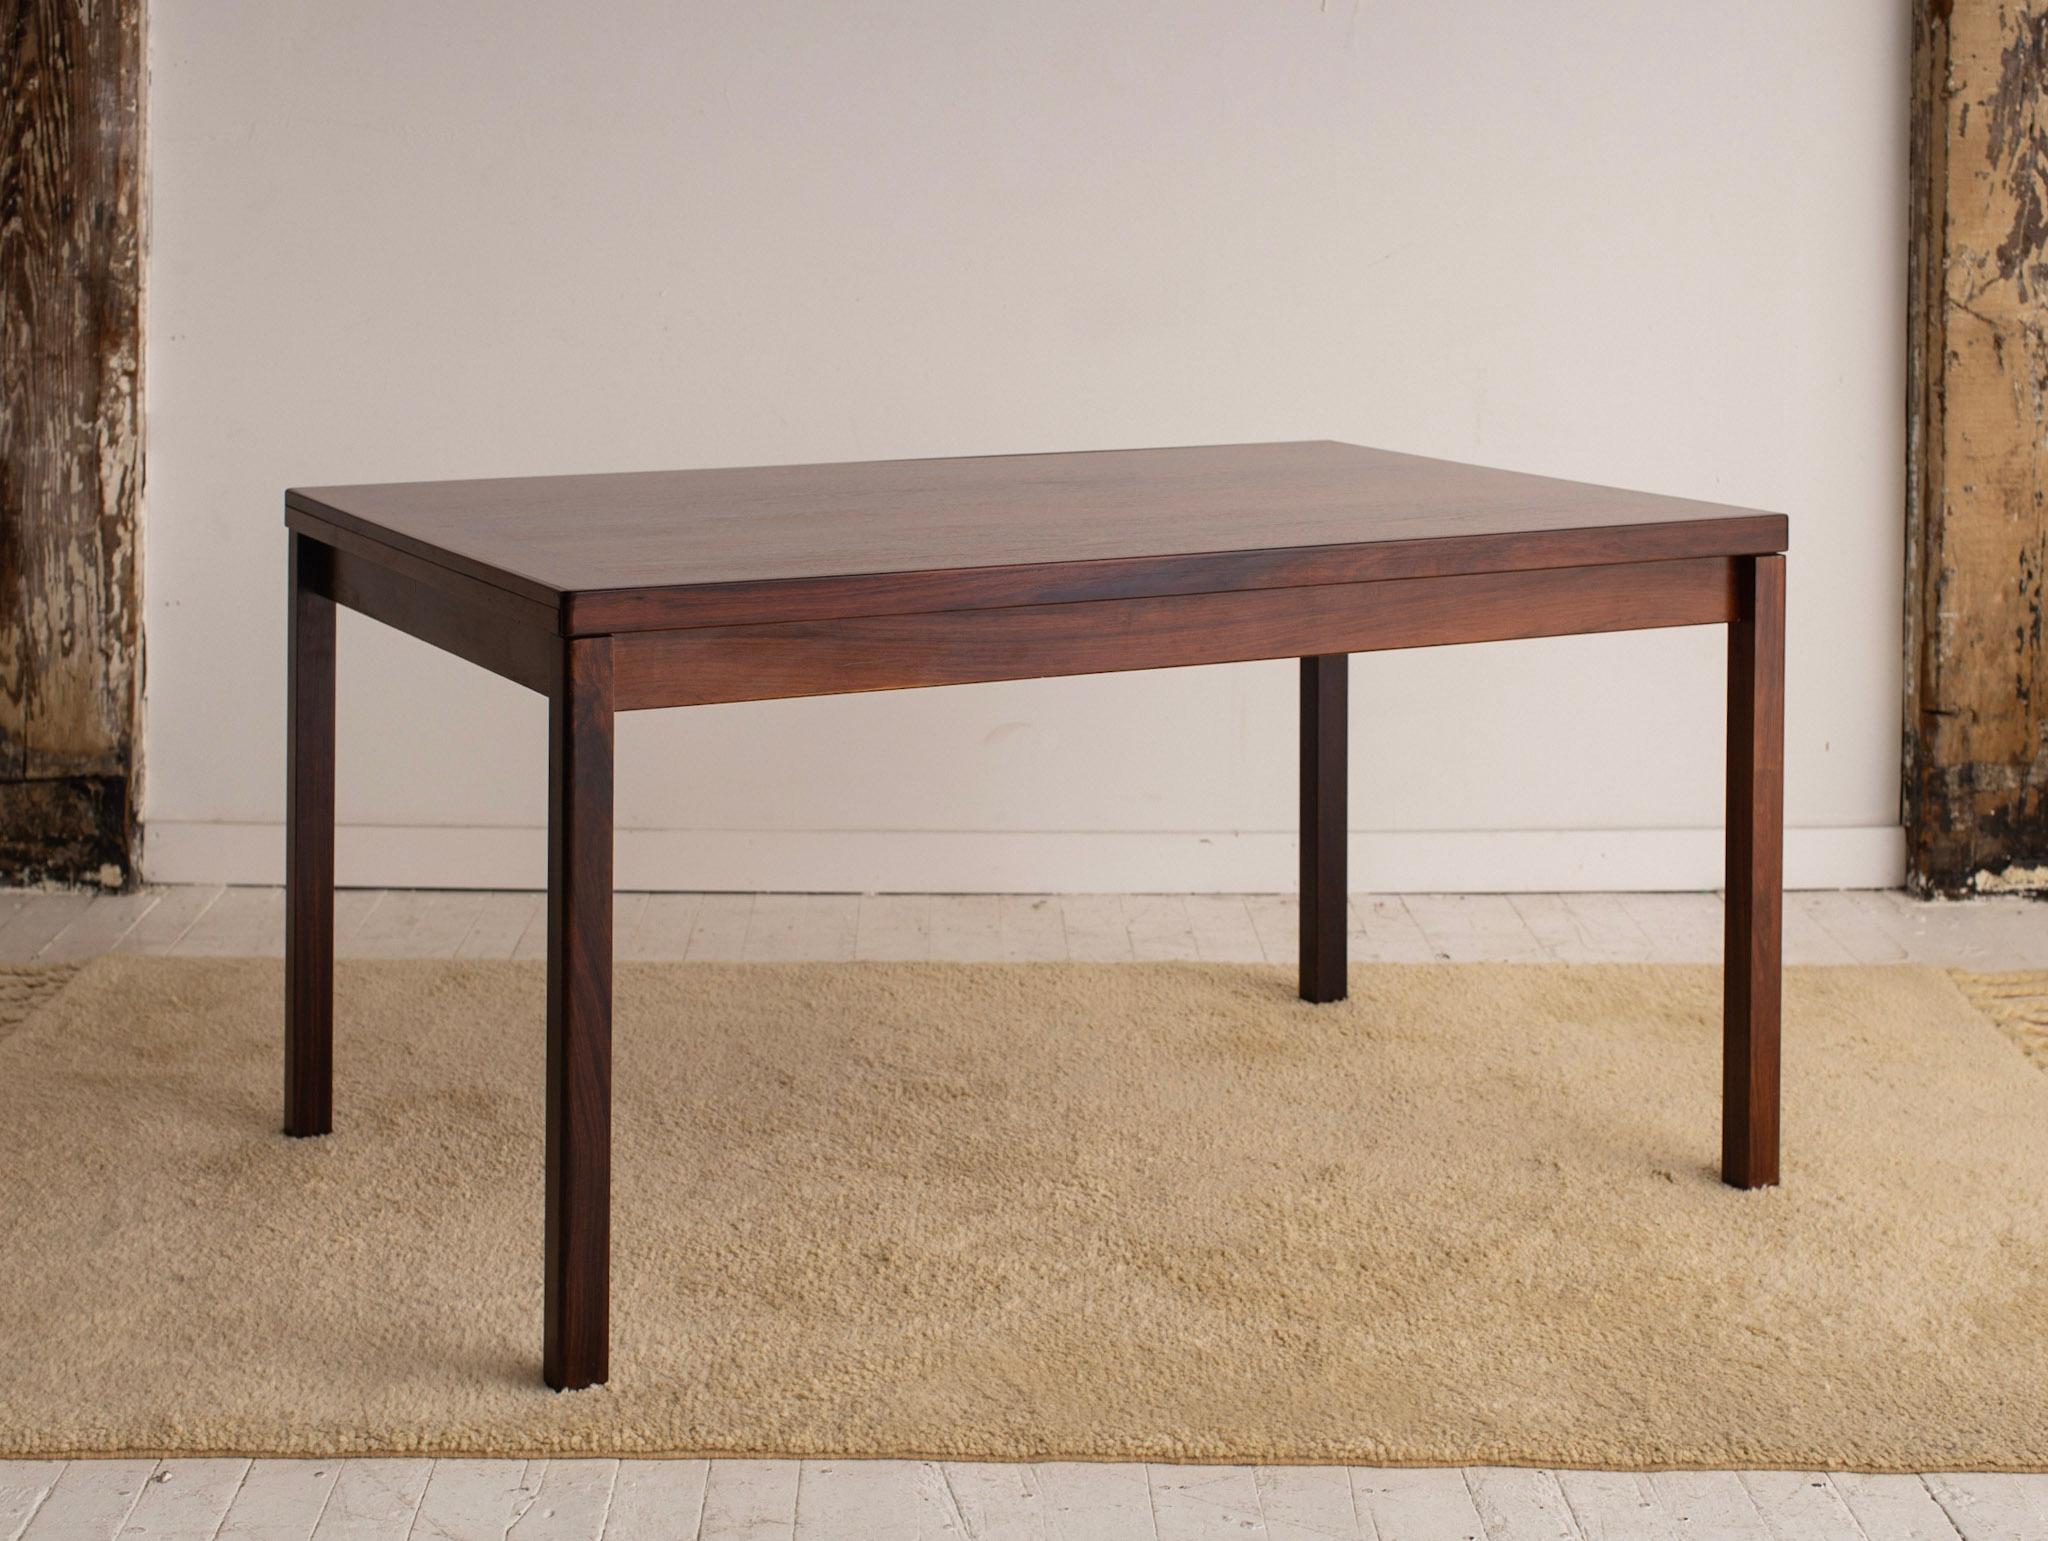 Mid-Century Modern Danish dining table in rosewood. Beautiful rich wood grain. Two extendable leaves tuck away under tabletop. Table width extends to 95.“